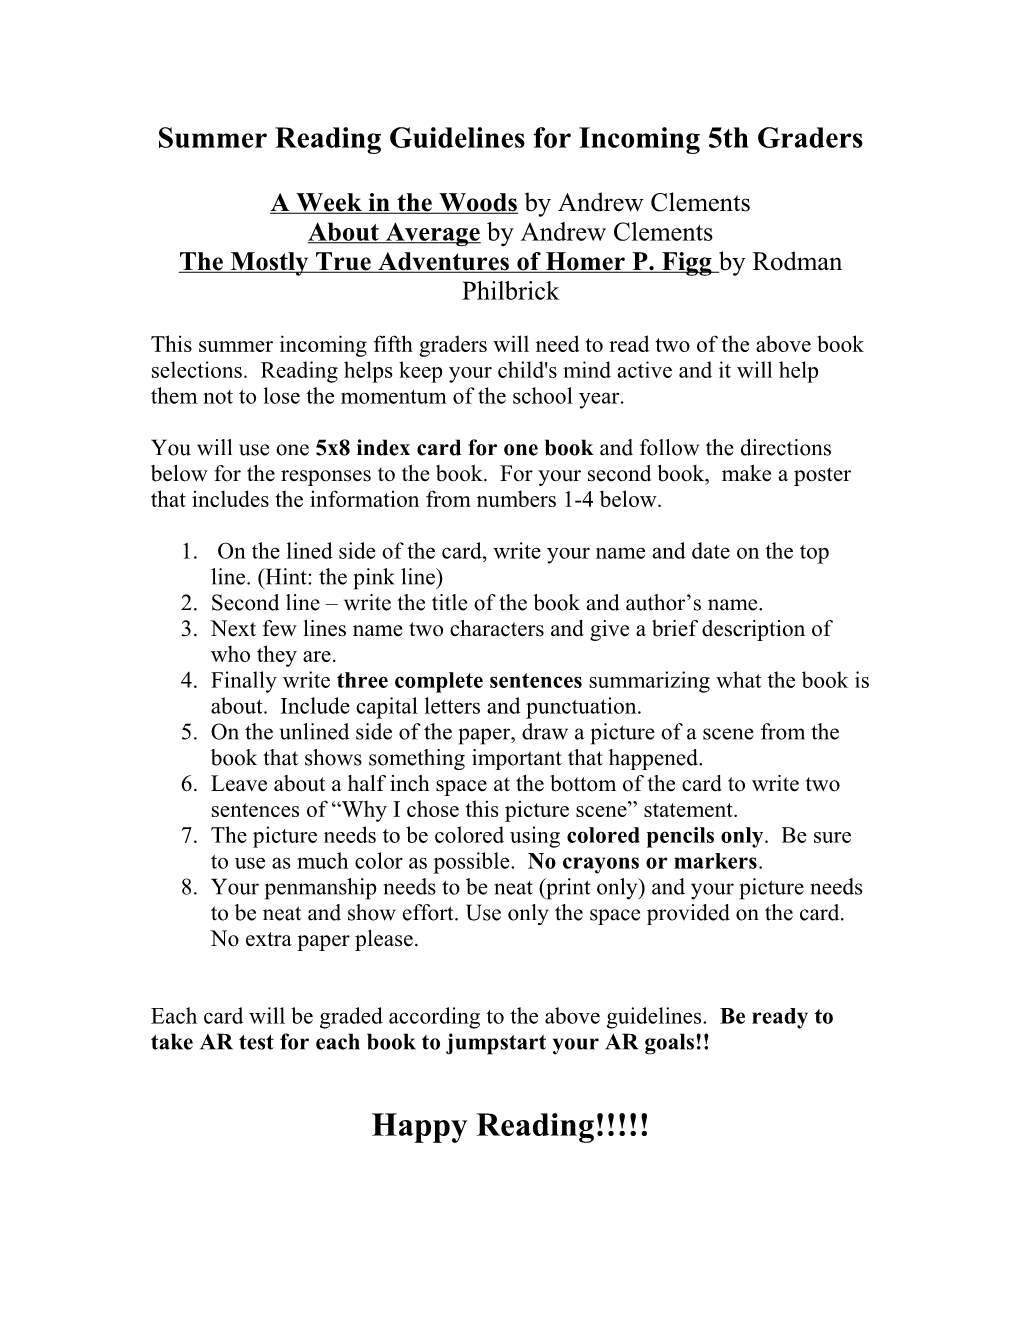 Summer Reading Guidelines for Incoming 5Th Graders